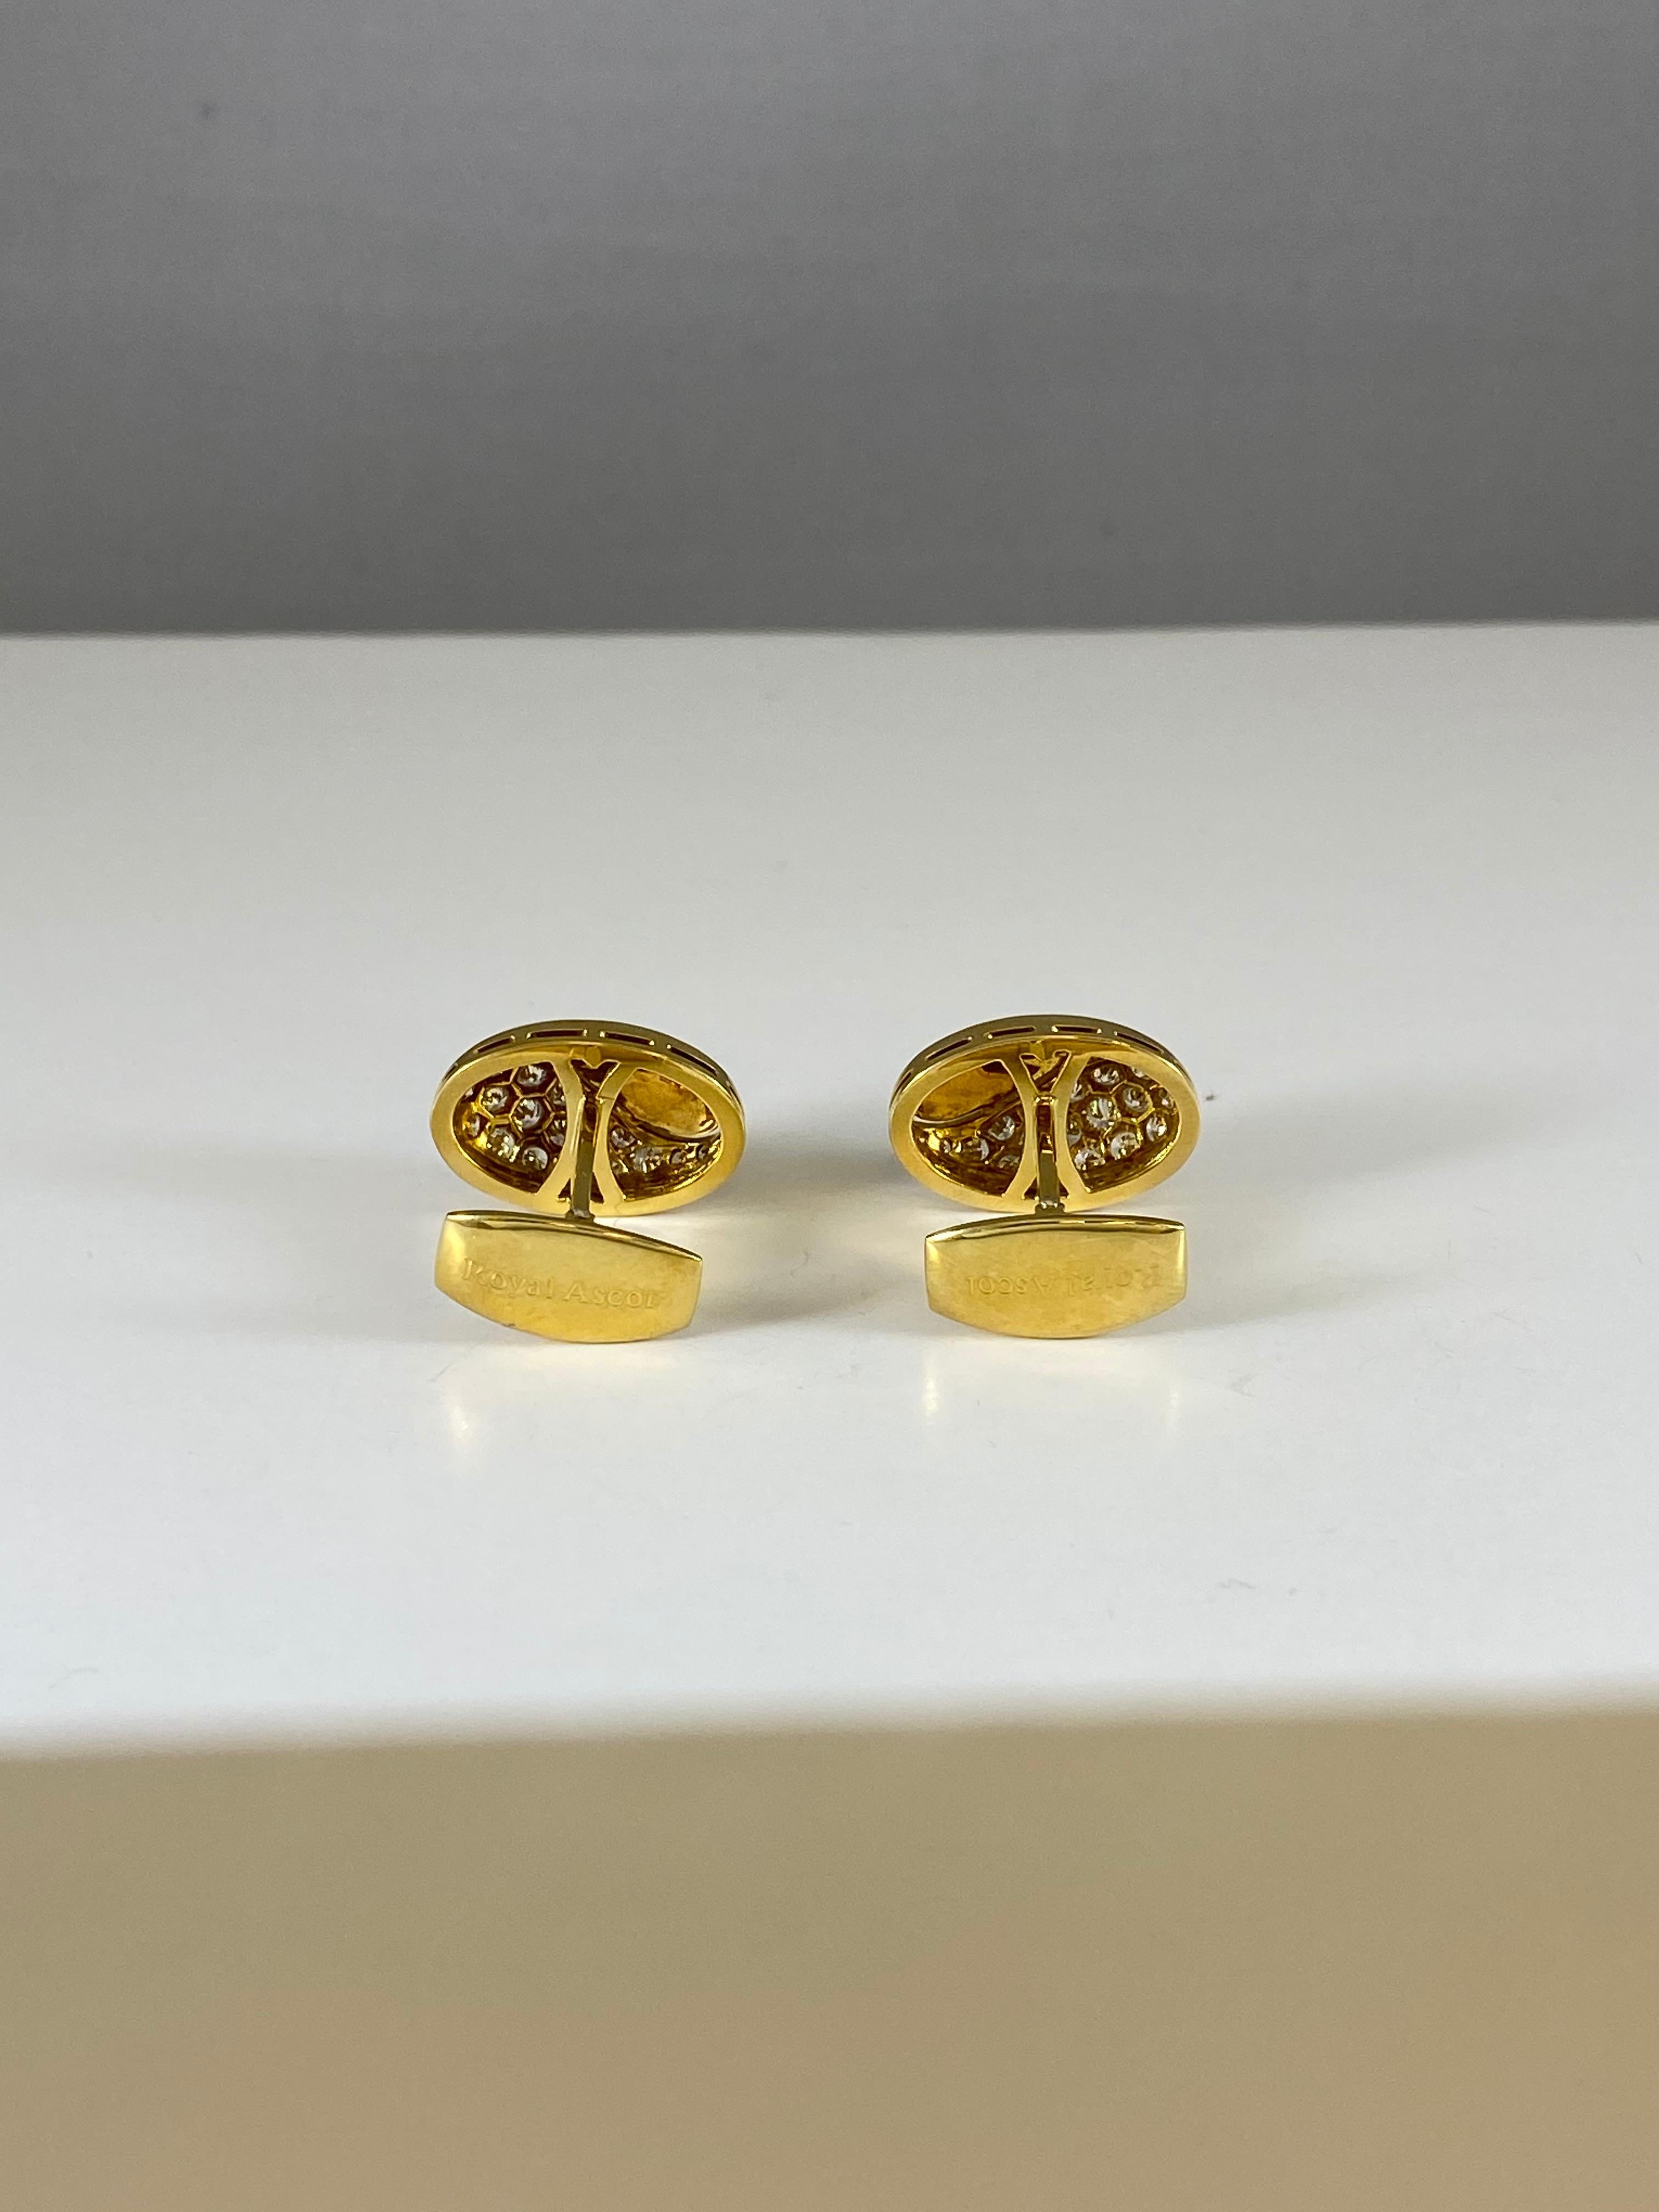 Hammerman Brothers Royal Ascot Diamond Oval Cufflinks In New Condition For Sale In New York, NY